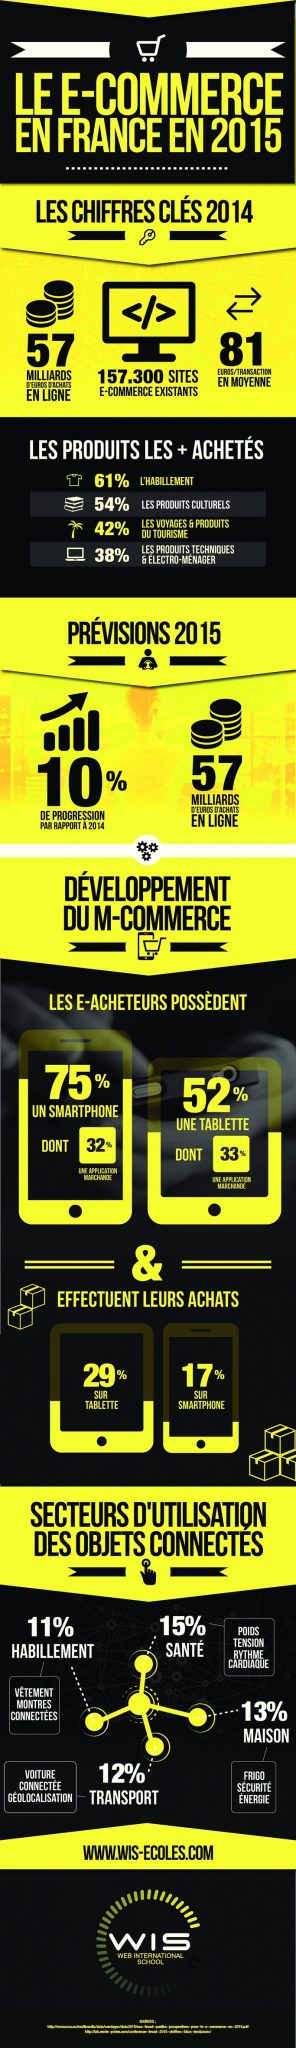 infographie ecommerce 2015